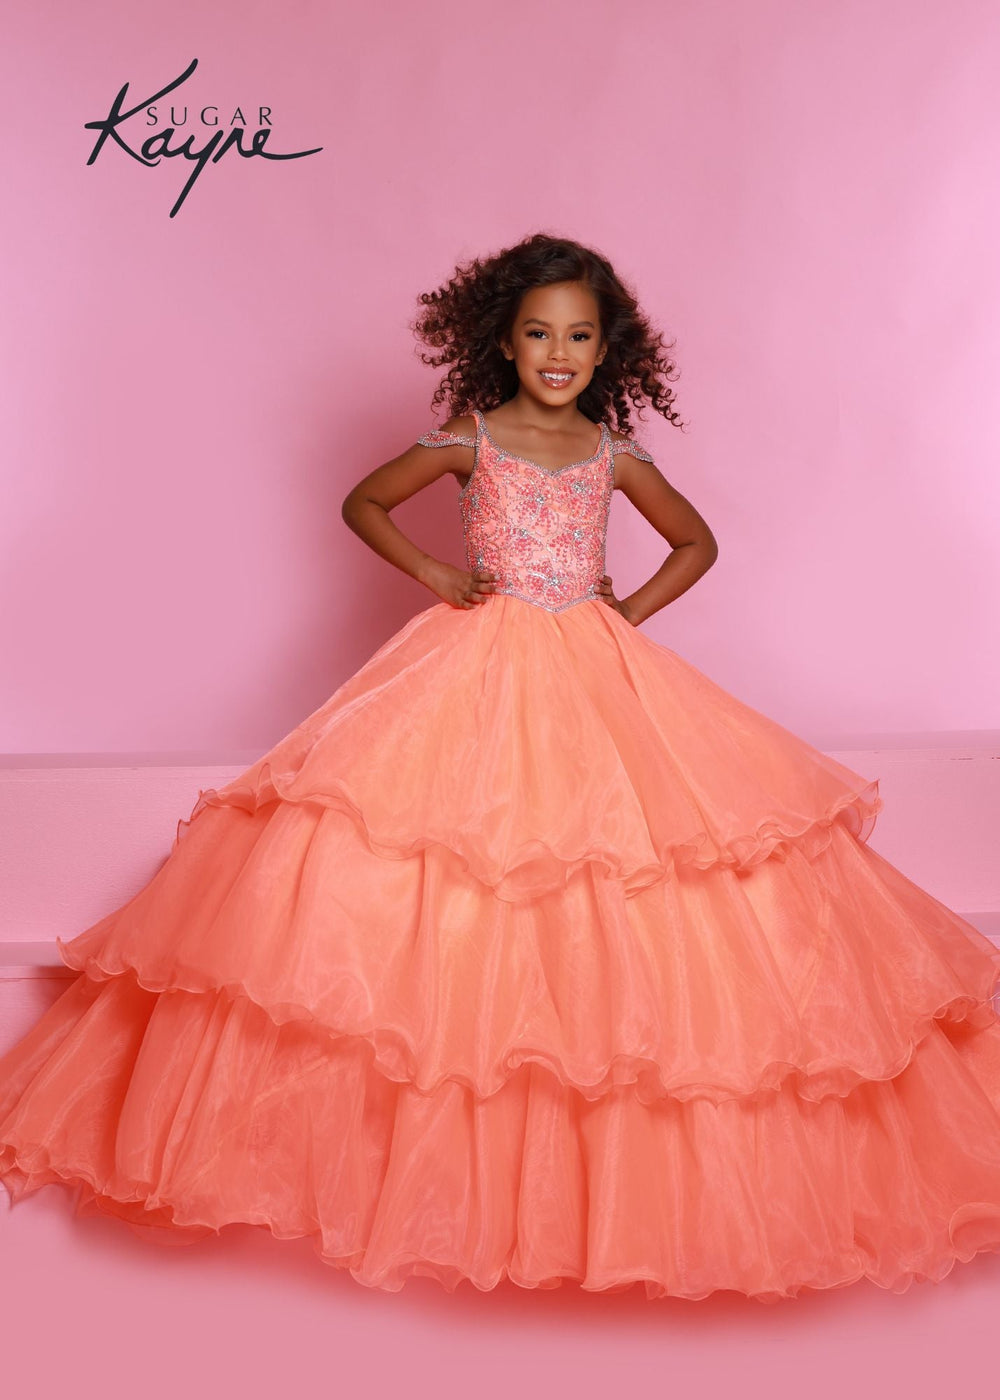 Sugar Kayne C318 Long Layer Ruffle Girls Pageant Dress off the Shoulder Ball Gown Beaded - FOSTANI